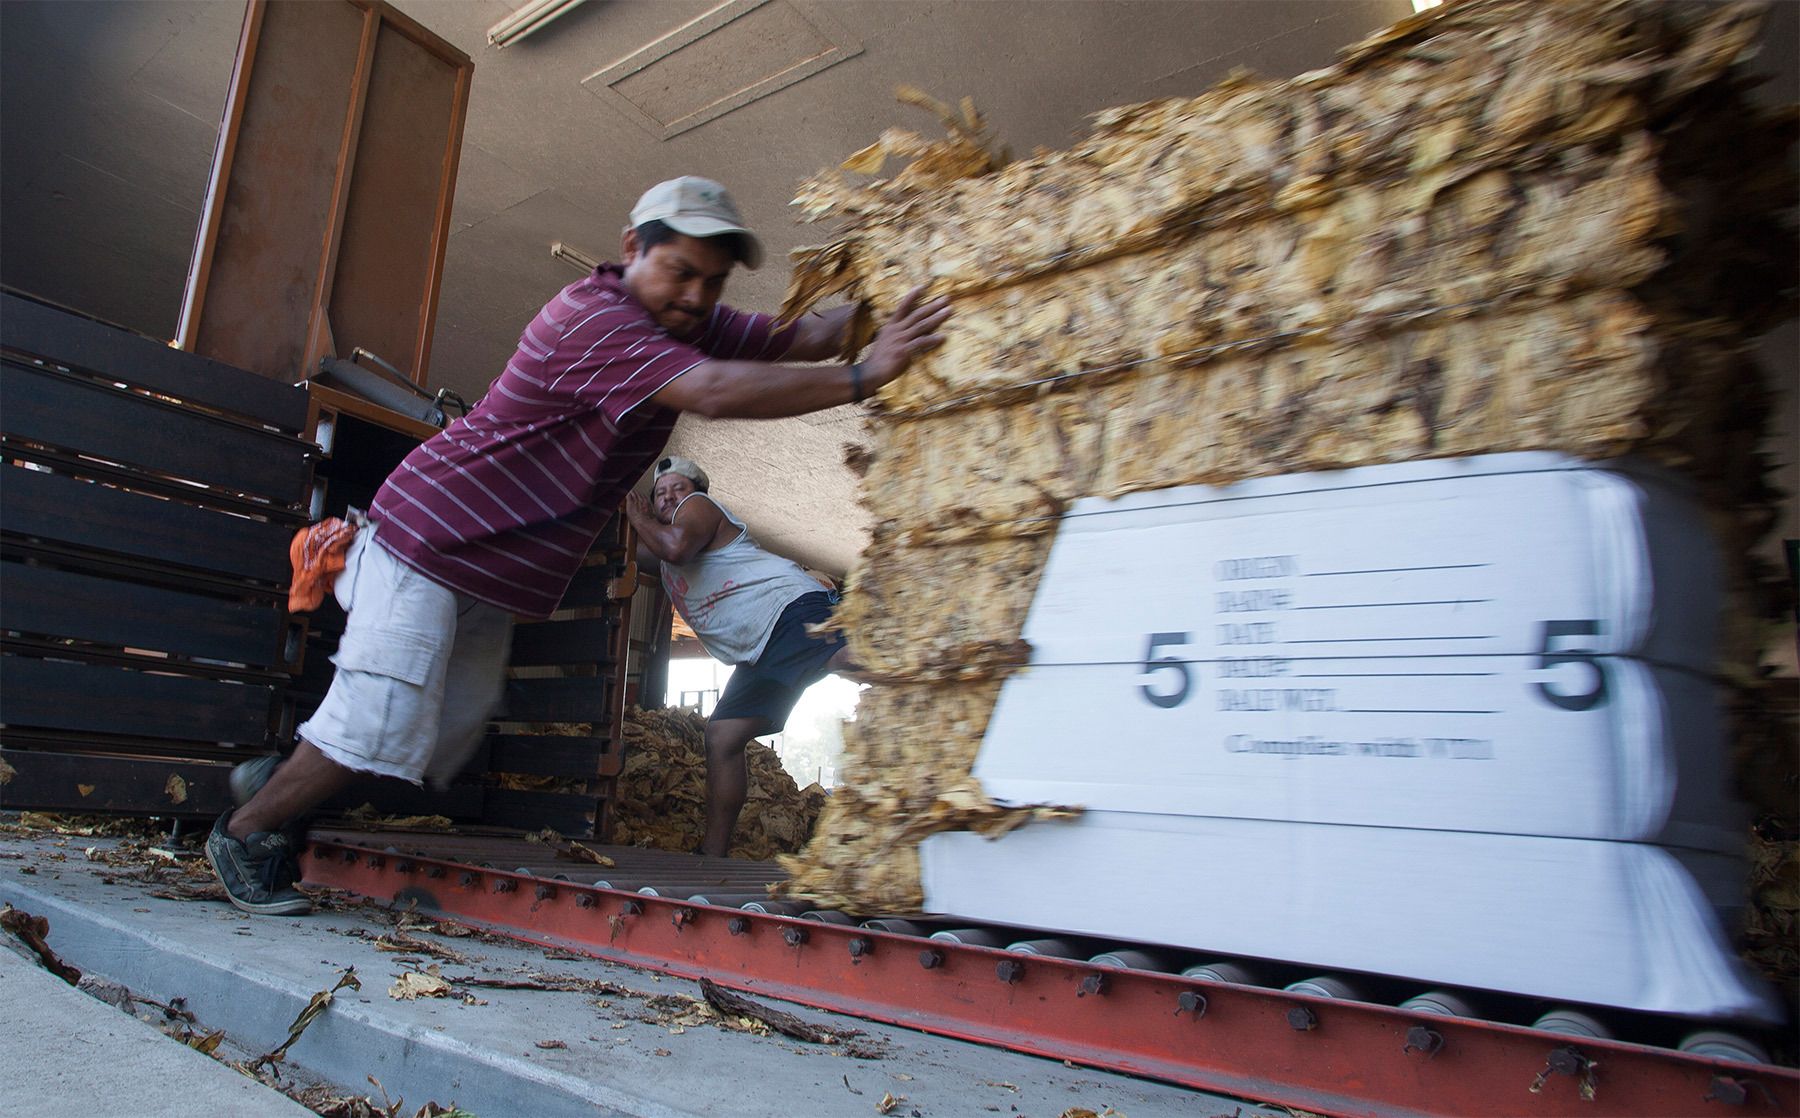 Adam Armenta (foreground) and other workers bundle flue-cured tobacco at Shelly Farms in the Pleasant View community of Horry County, South Carolina July 26, 2013. The traditional tobacco harvest requires many labor intensive hours to bring the crop to market, especially with the flue-cured variety prominent in the southern United States. With the growing health concerns with smoking in the US, most farmers use market cooperatives to sell their crop to the growing markets in China.      Picture taken on July 26, 2013.   REUTERS/Randall Hill (UNITED STATES)